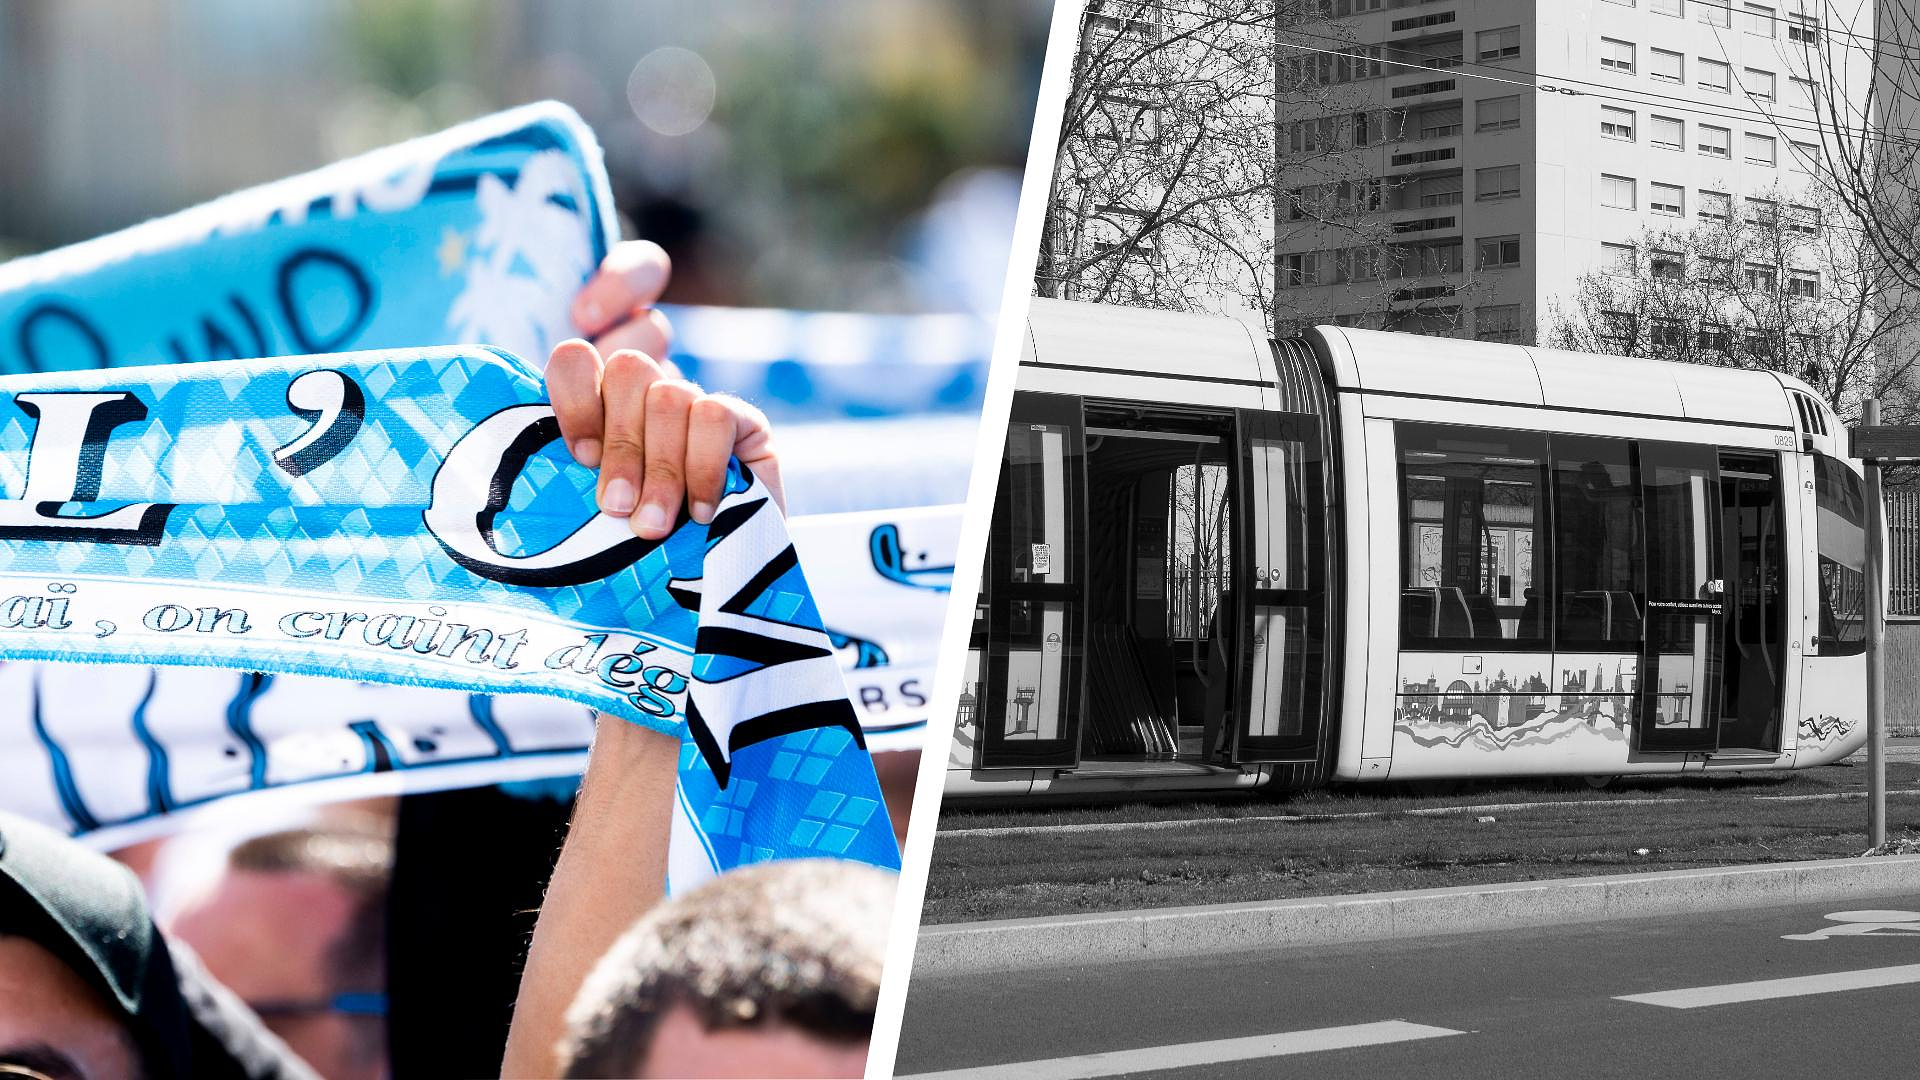 OL-OM: a Marseille supporter attacked after shouting “go OM” on the Lyon tramway